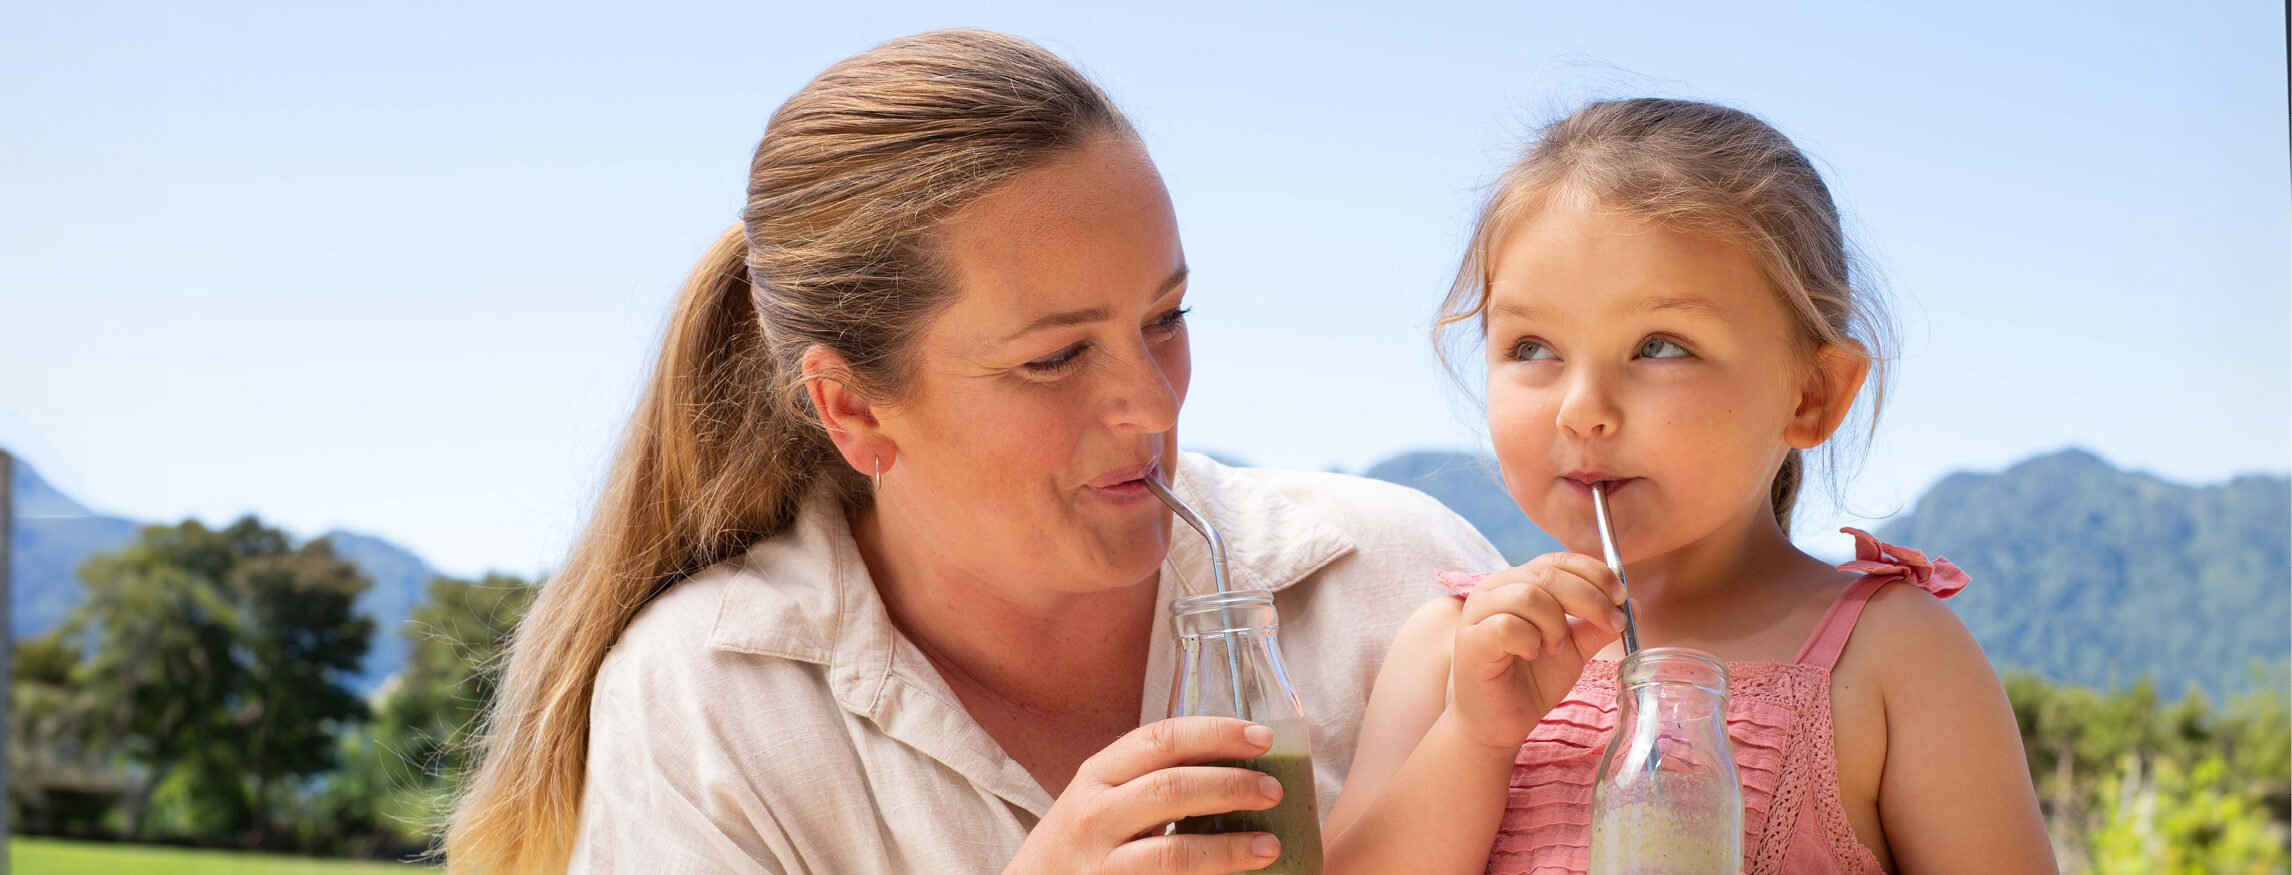 mother and daughter enjoying a nourishing smoothie together outdoors